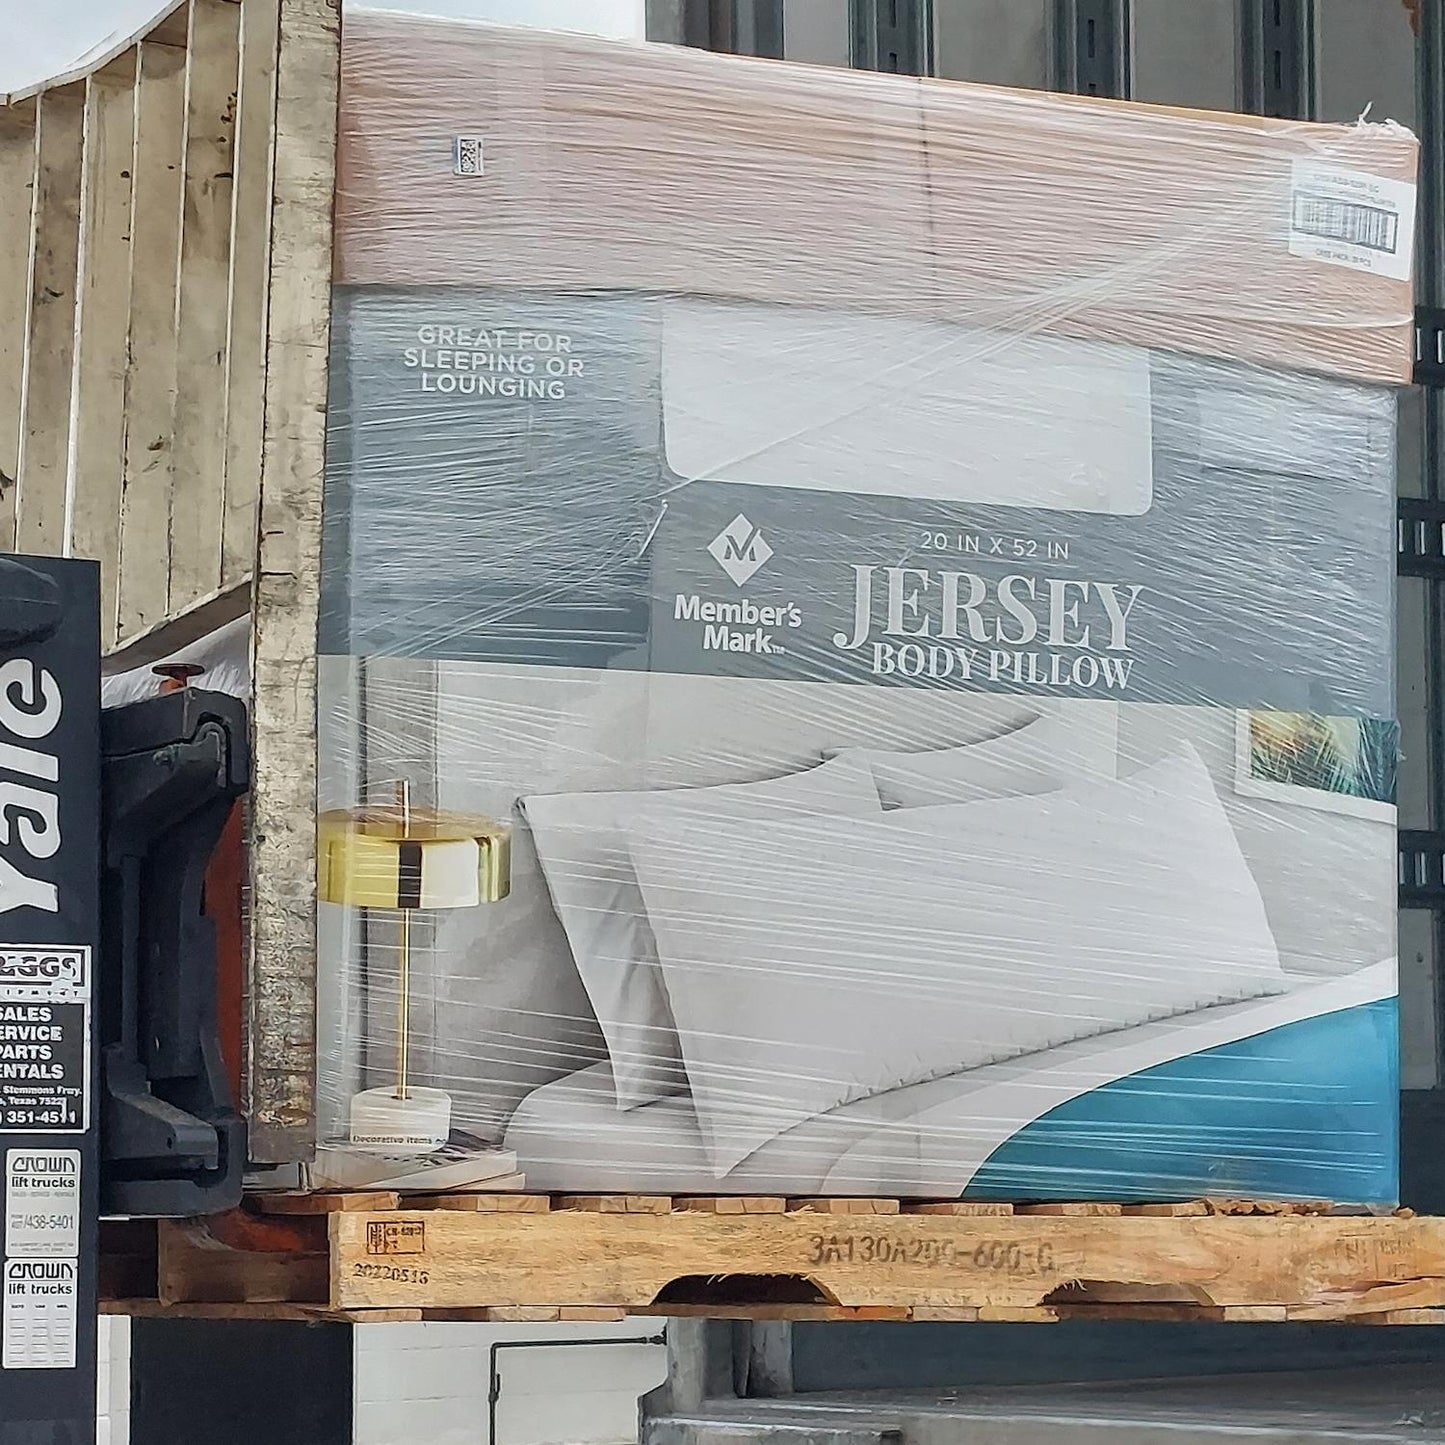 Wholesale Pallet of Jersey Body Pillows Brand New Overstock